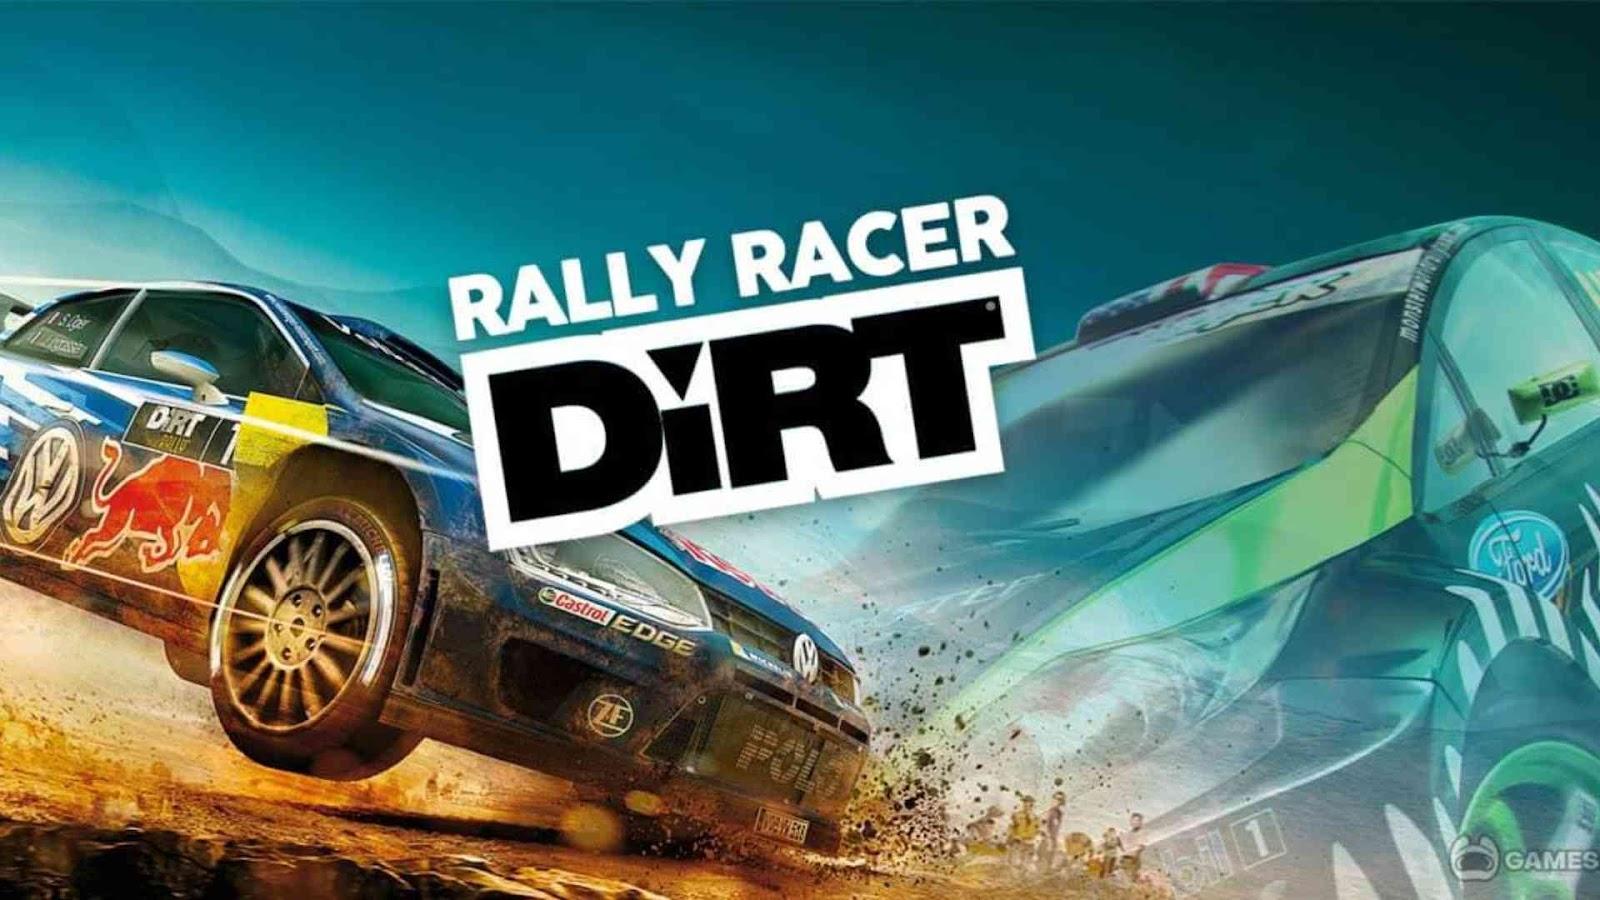 Top 10 Android Racing Games You Must Play in 2023-LDPlayer's Choice-LDPlayer